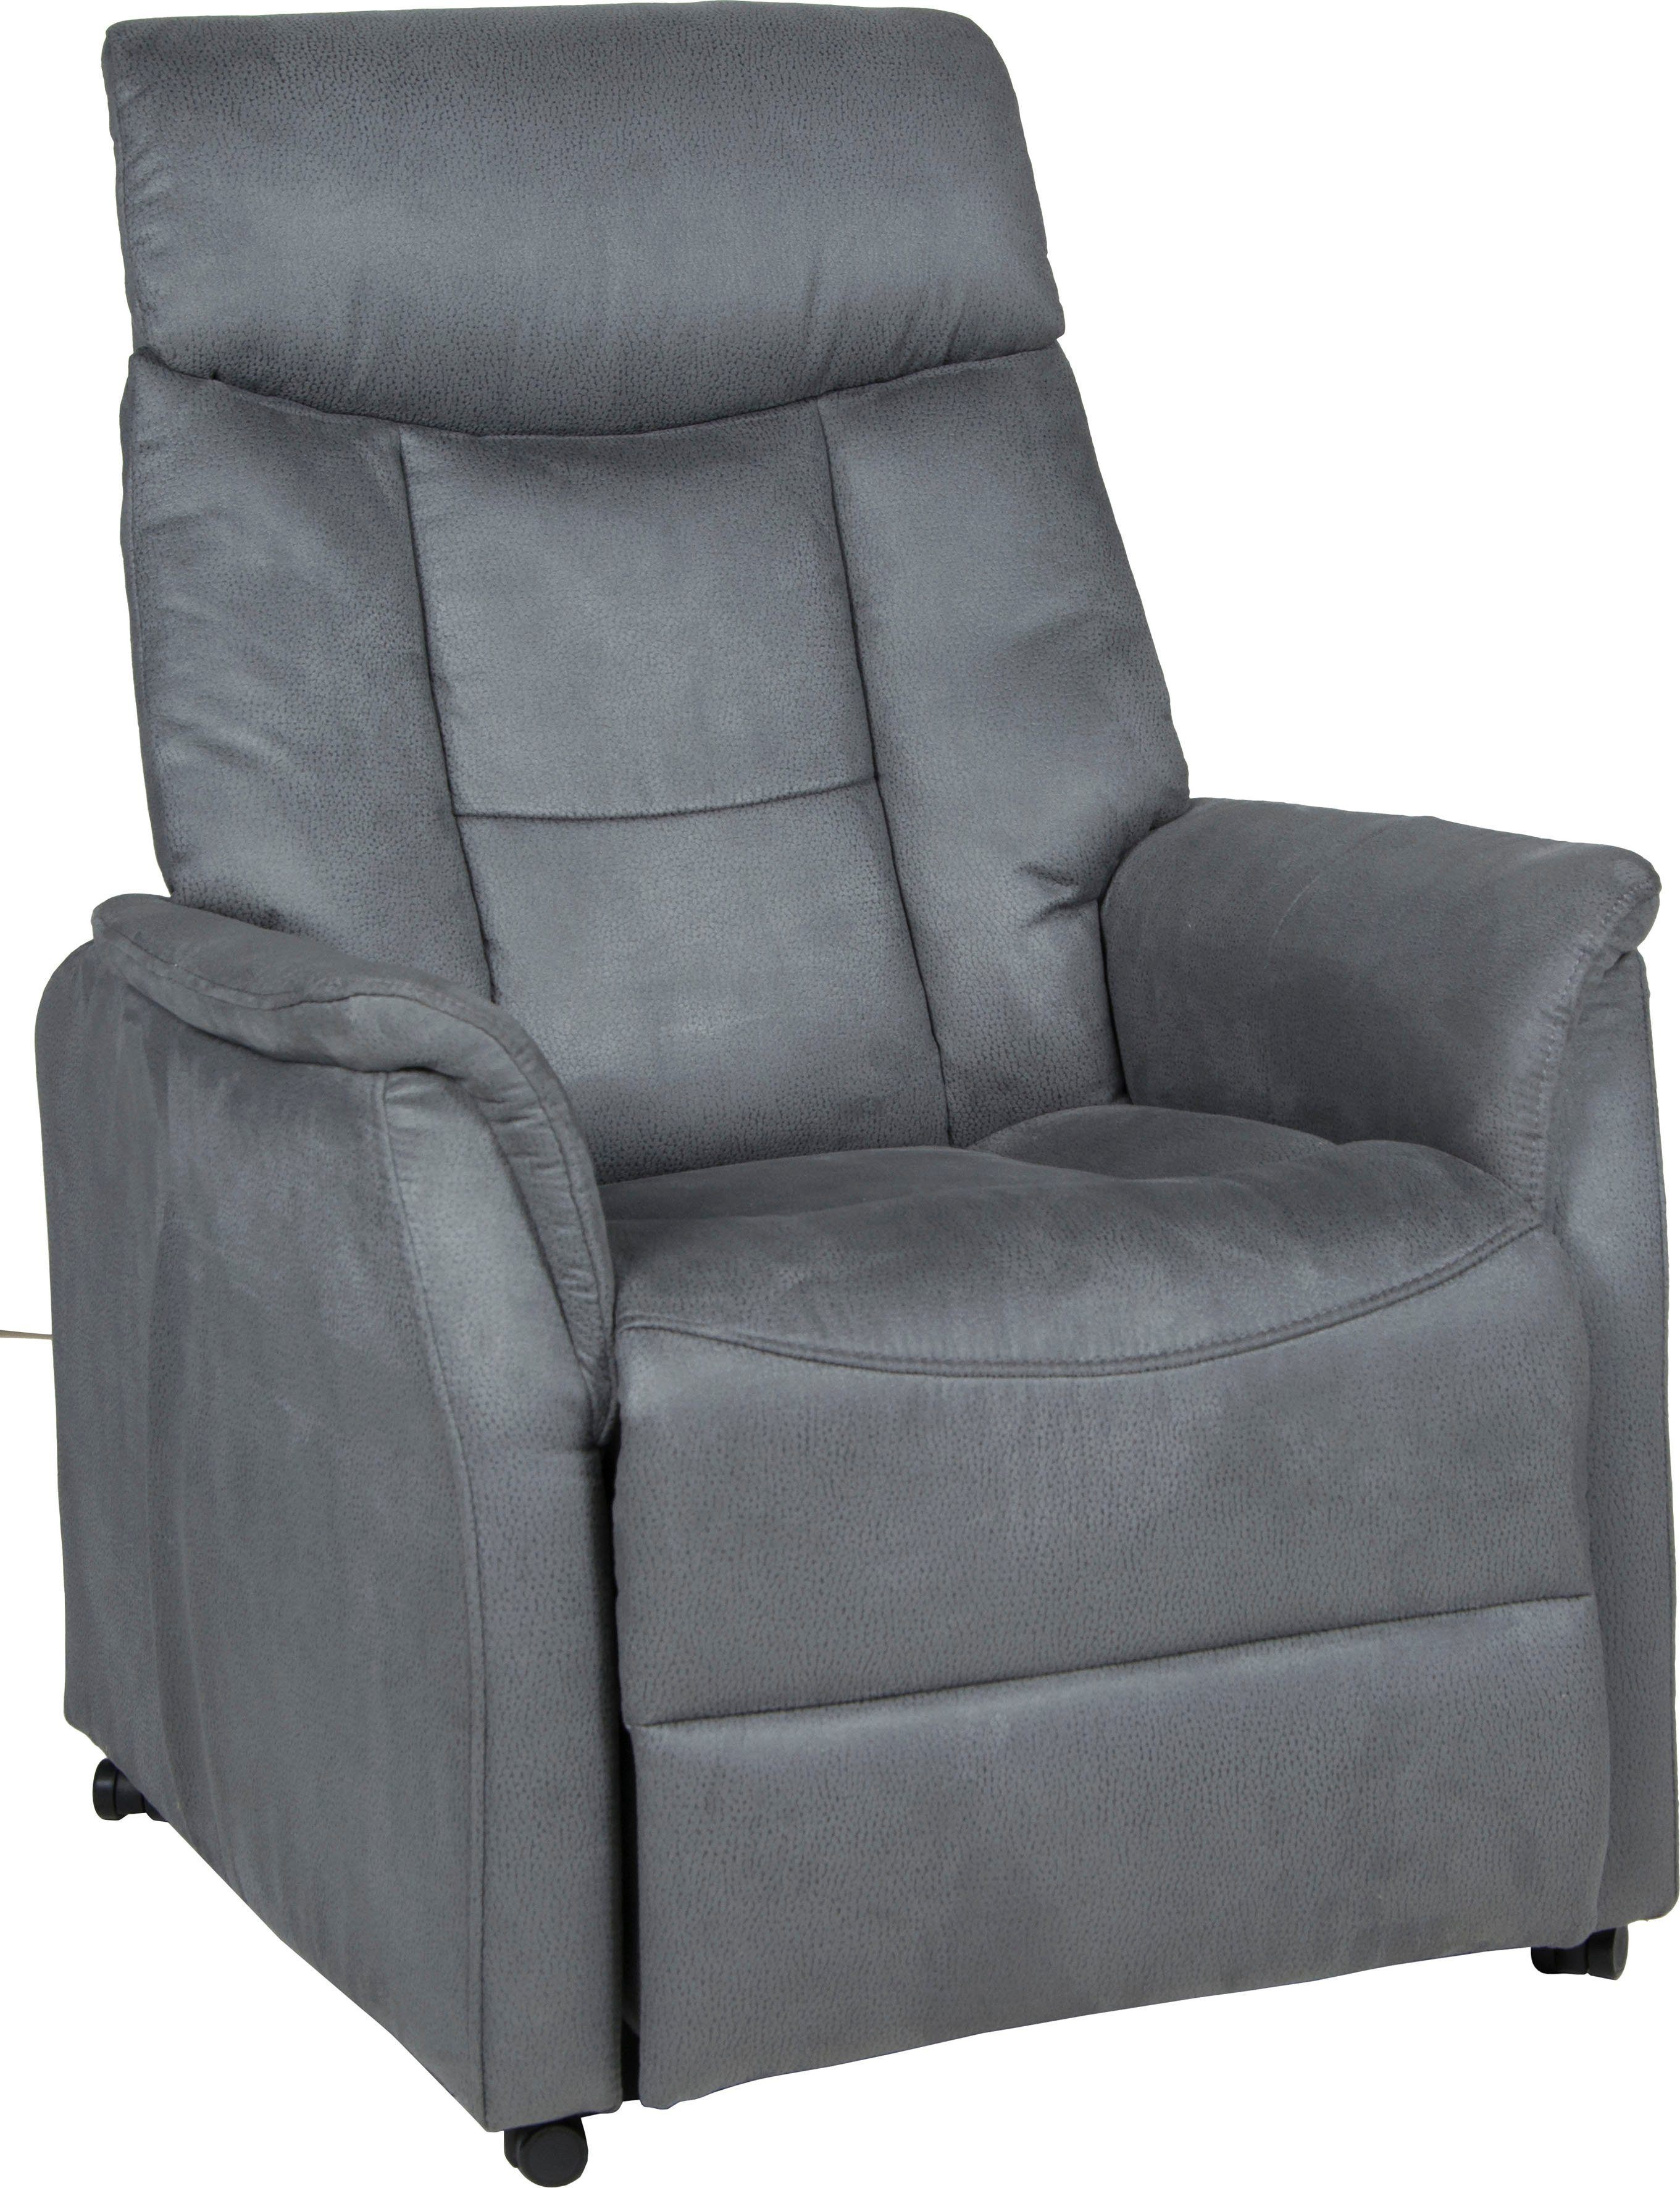 Duo Collection TV-Sessel Sorrent mit regulierbarer Sitzheizung